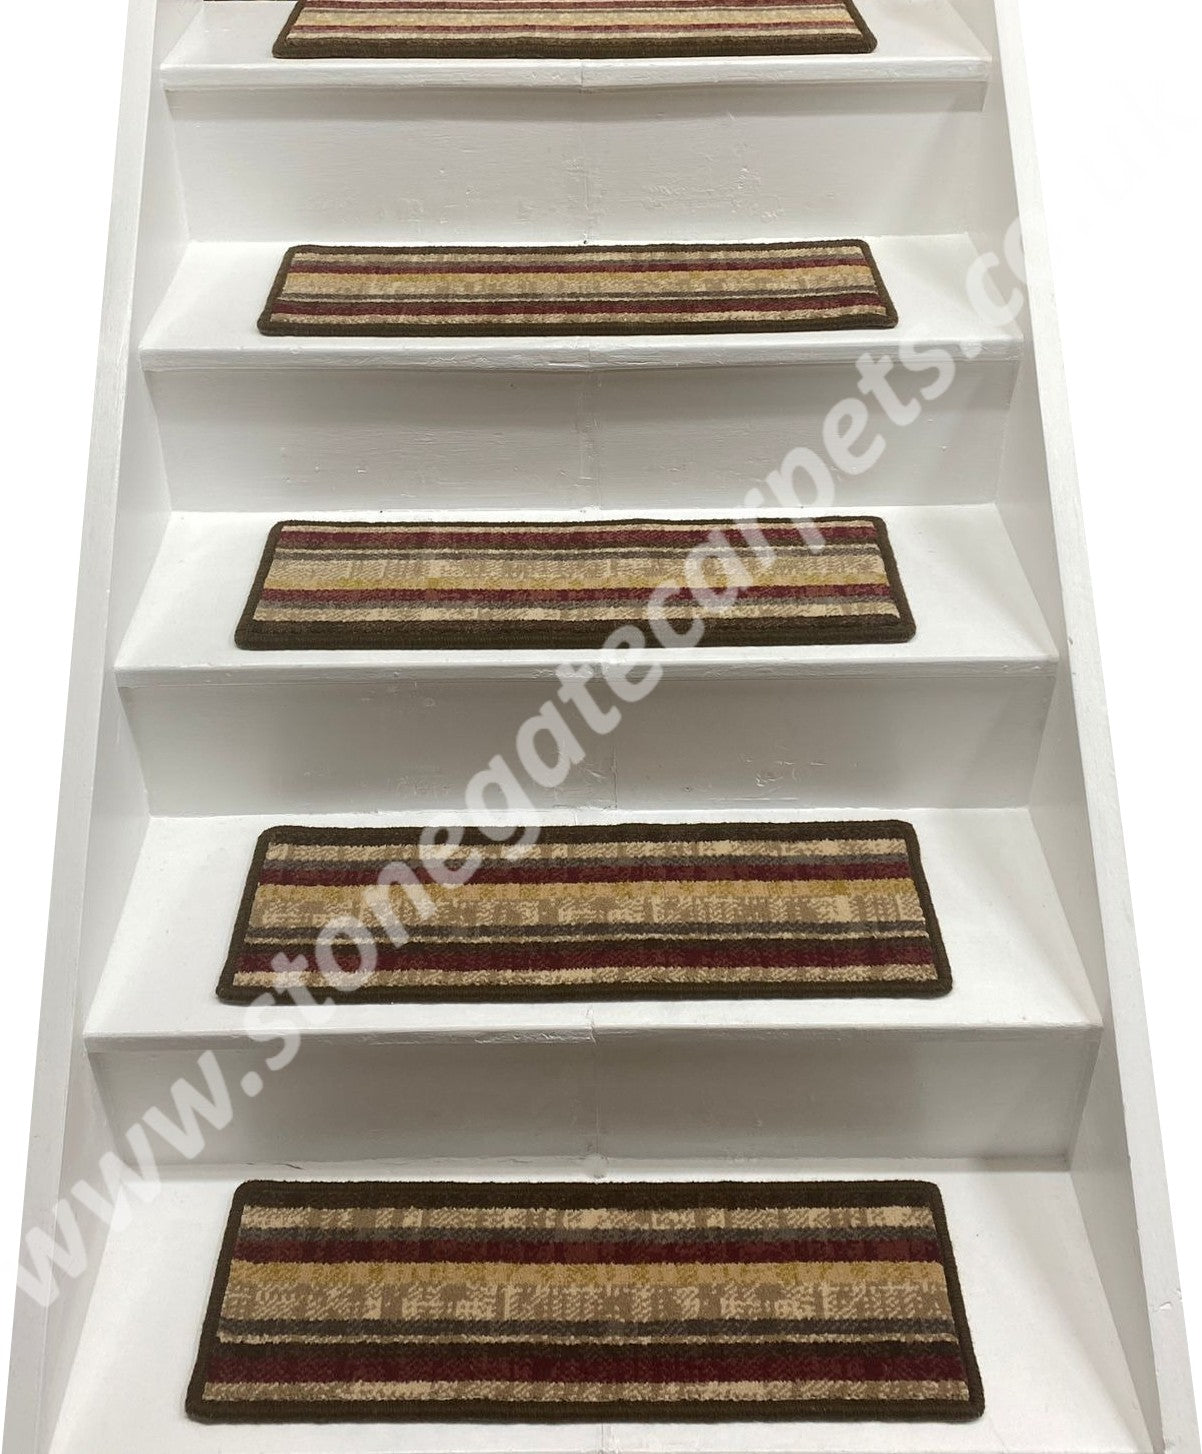 Axminster Carpets Special Antique Gold Stair Pads x 12 with Free Delivery